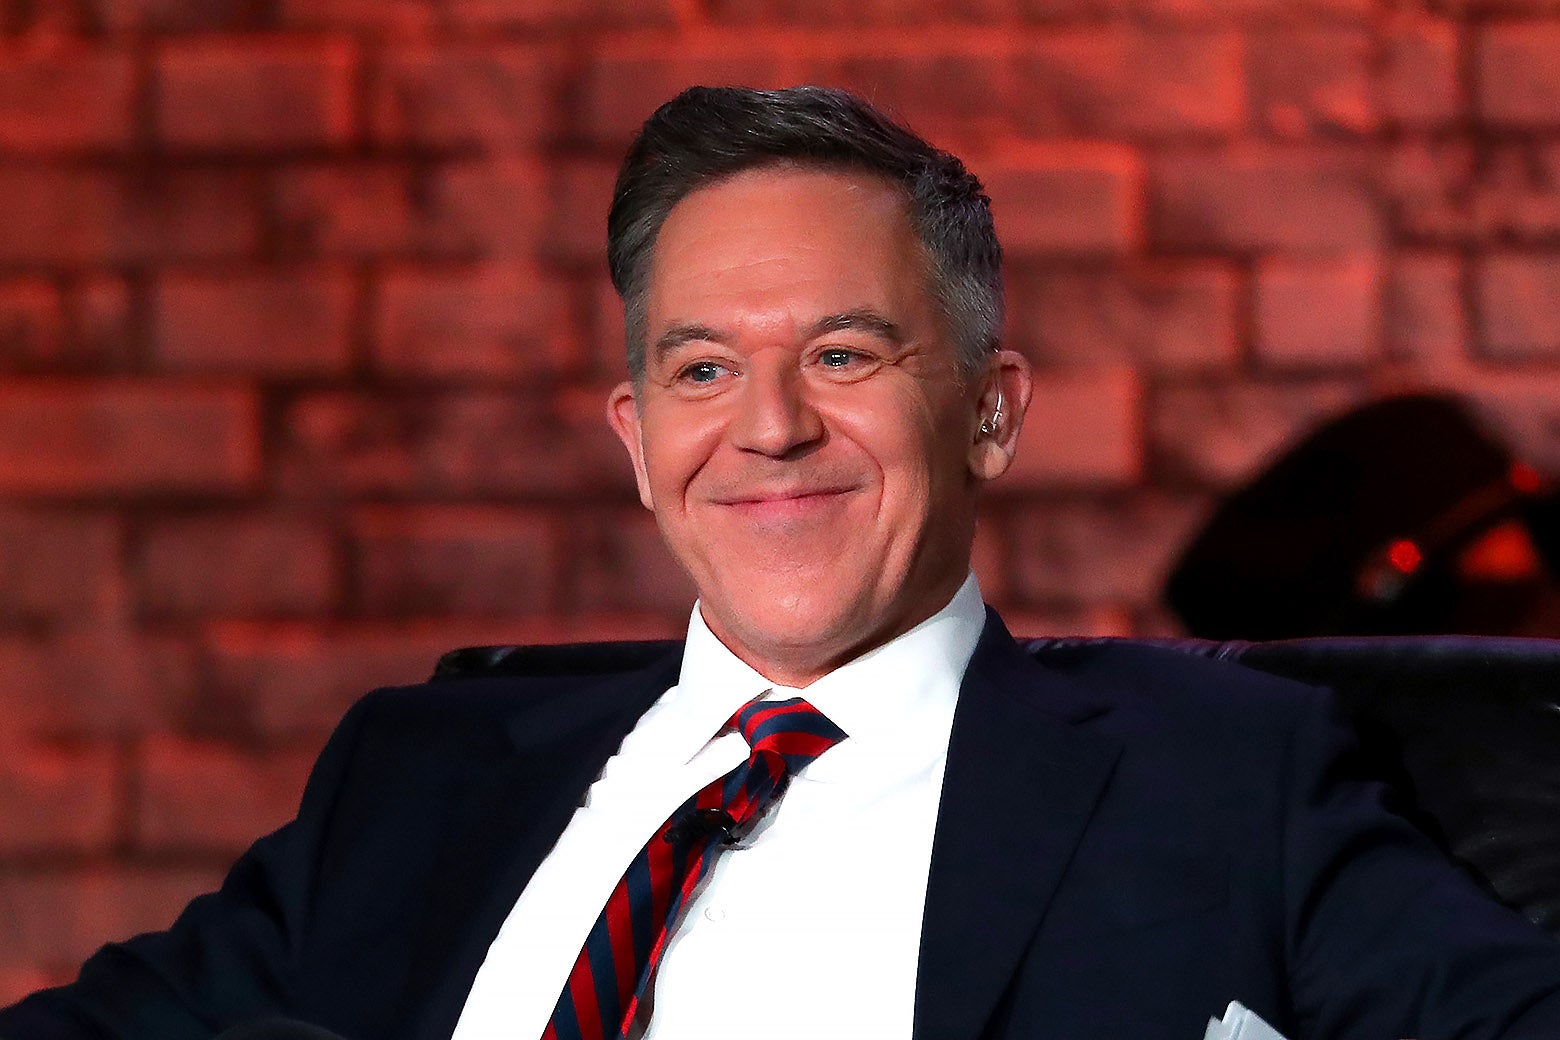 Greg Gutfeld sitting in a chair onstage with a smug grin.